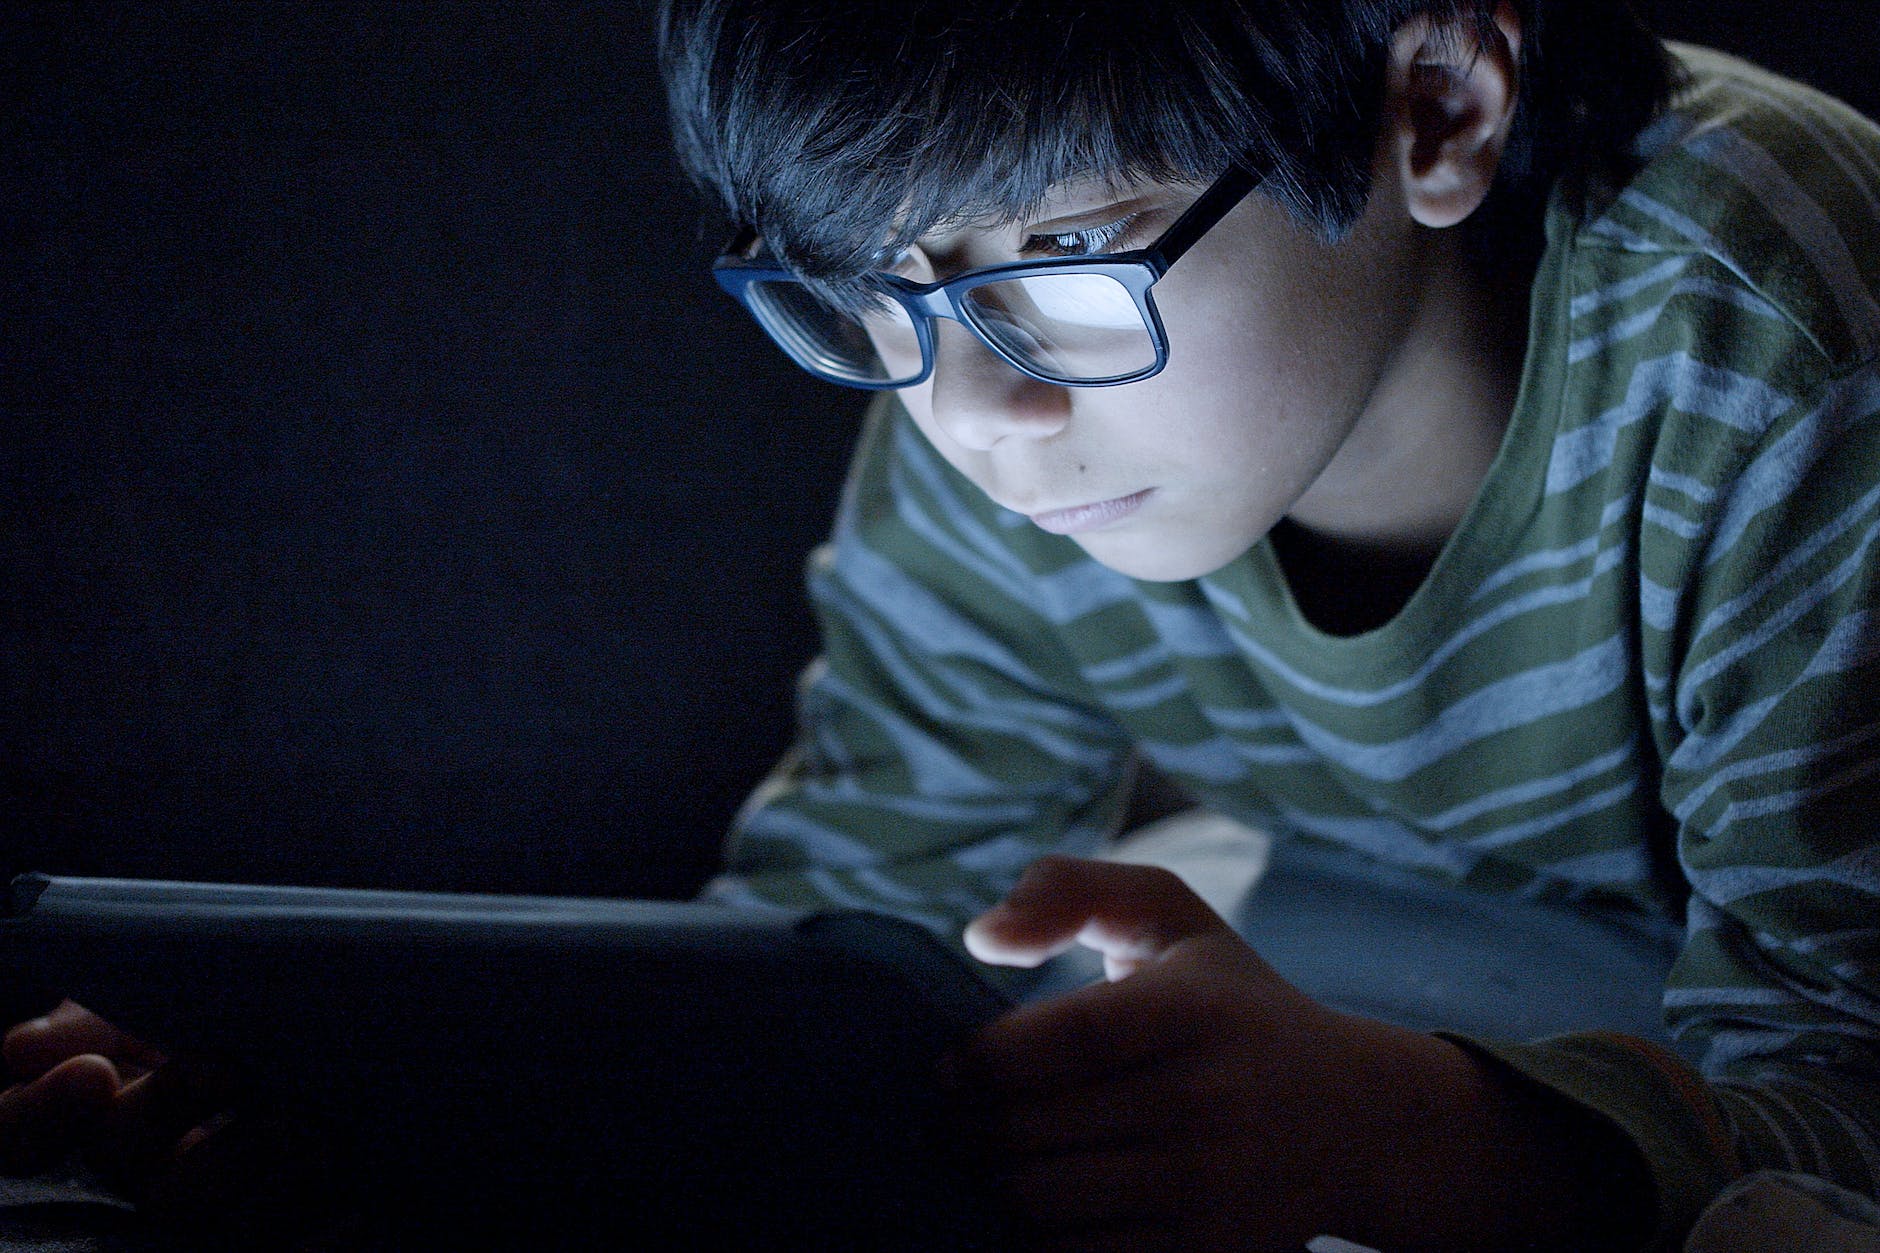 boy wearing eyeglasExcessive screen time causing dry eye problems in kidsses using a tablet in the dark room